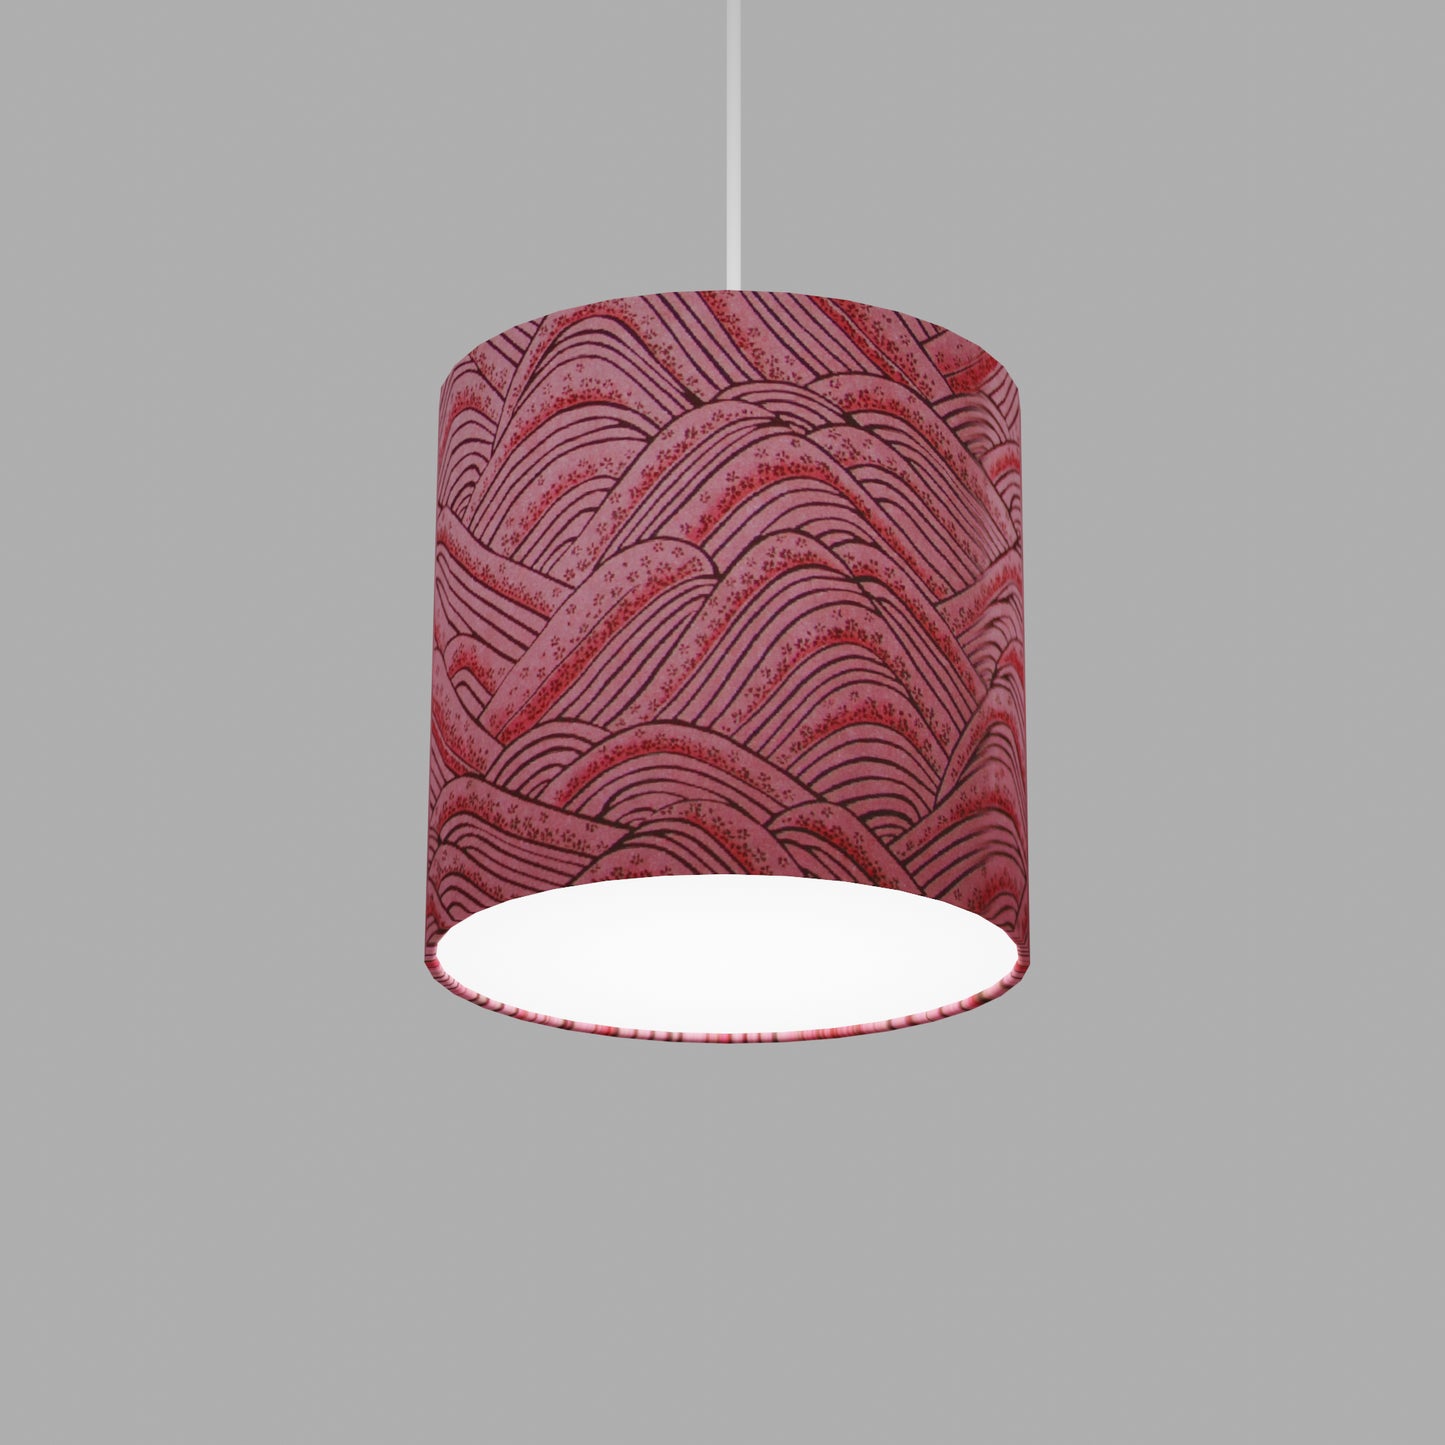 Drum Lamp Shade - W04 ~ Pink Hills with Gold Flowers, 20cm(d) x 20cm(h)